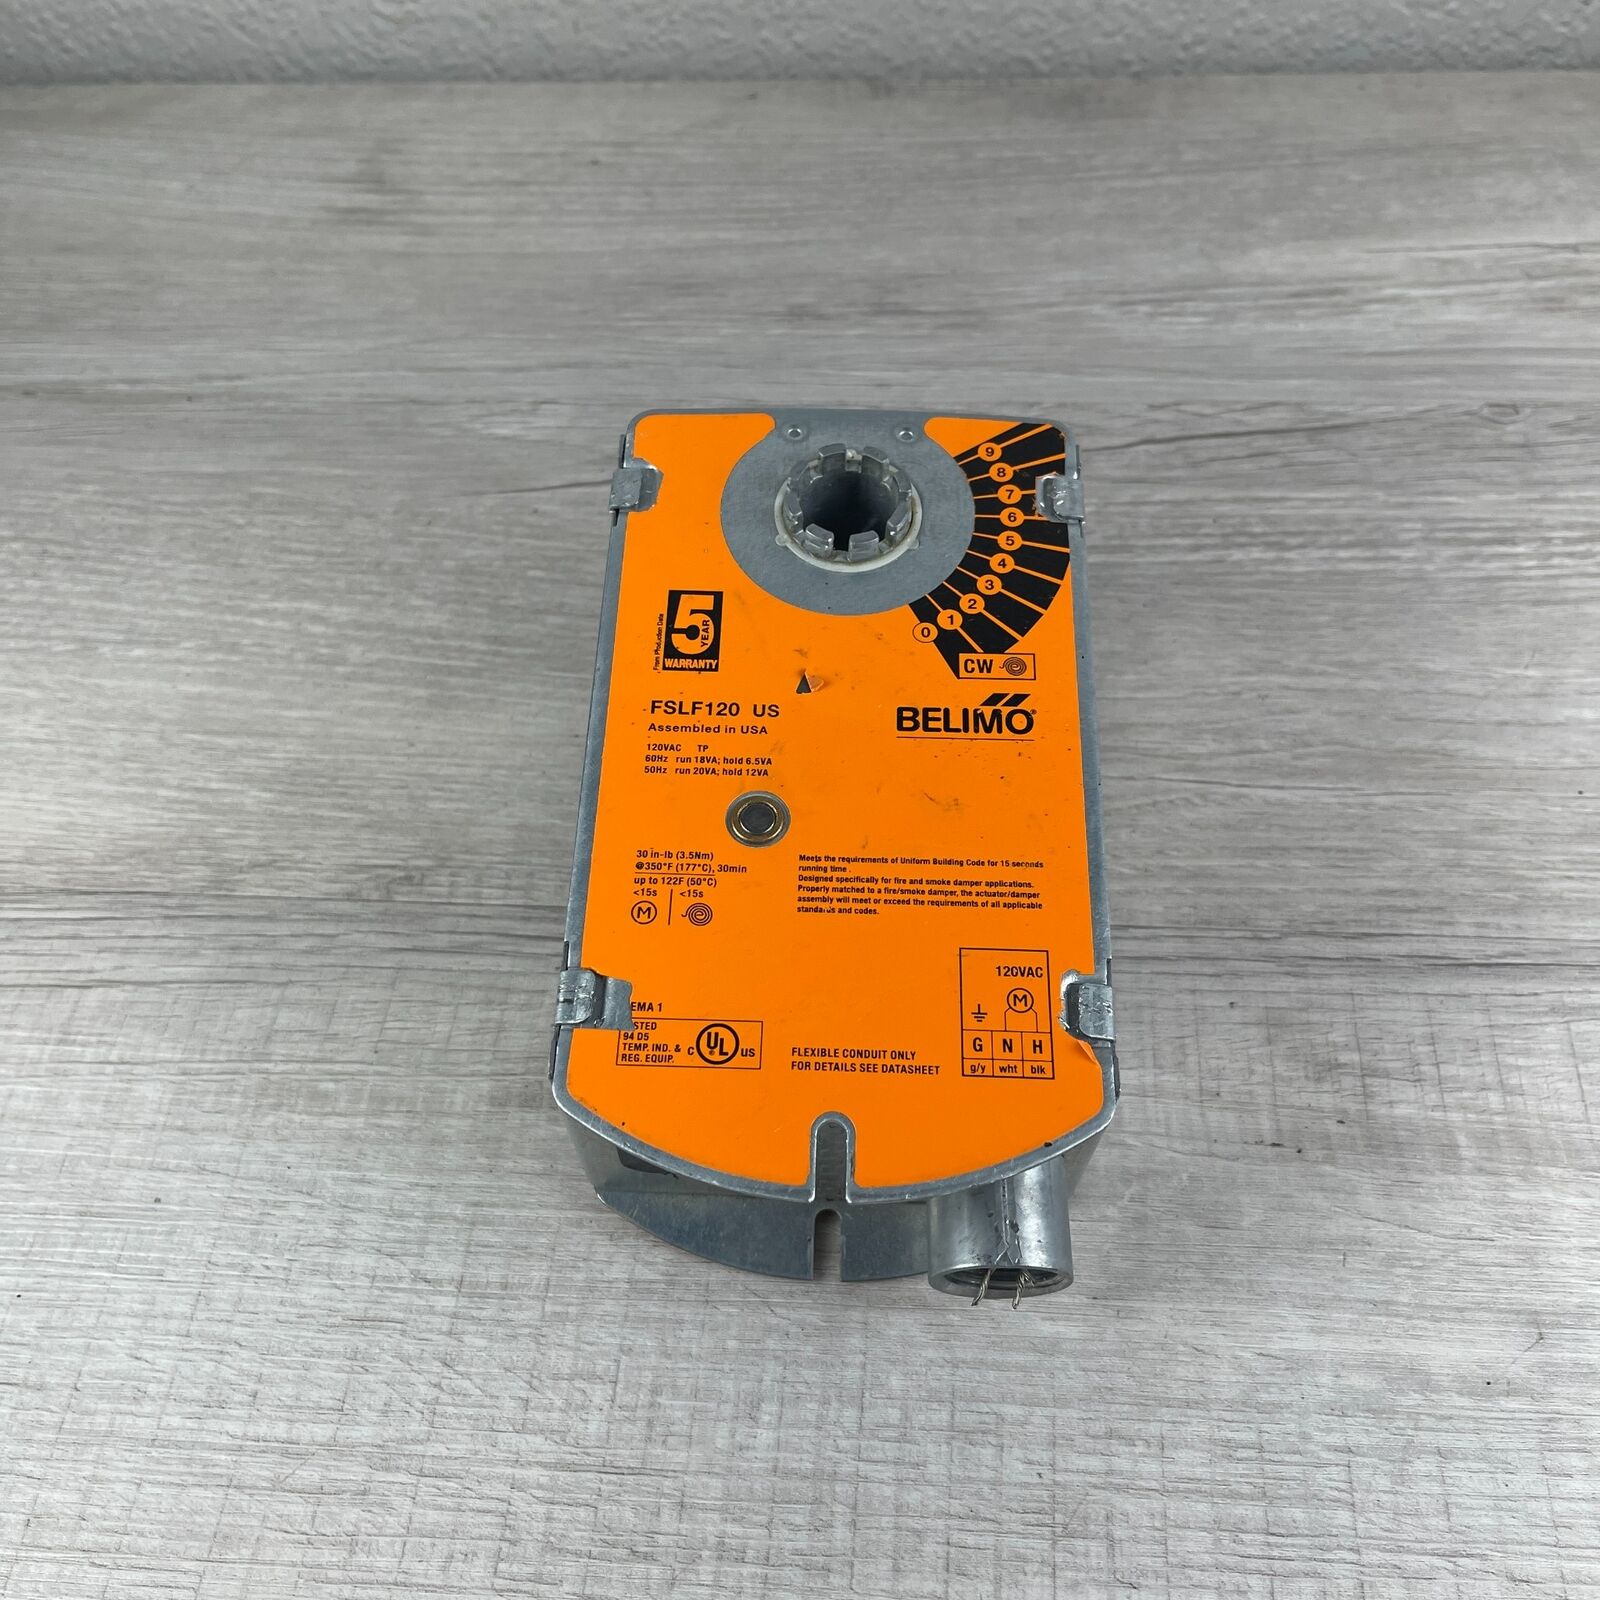 Belimo FSLF120 US 30 in-lb [3.5 Nm] Fire and Smoke Damper Actuator - For Parts